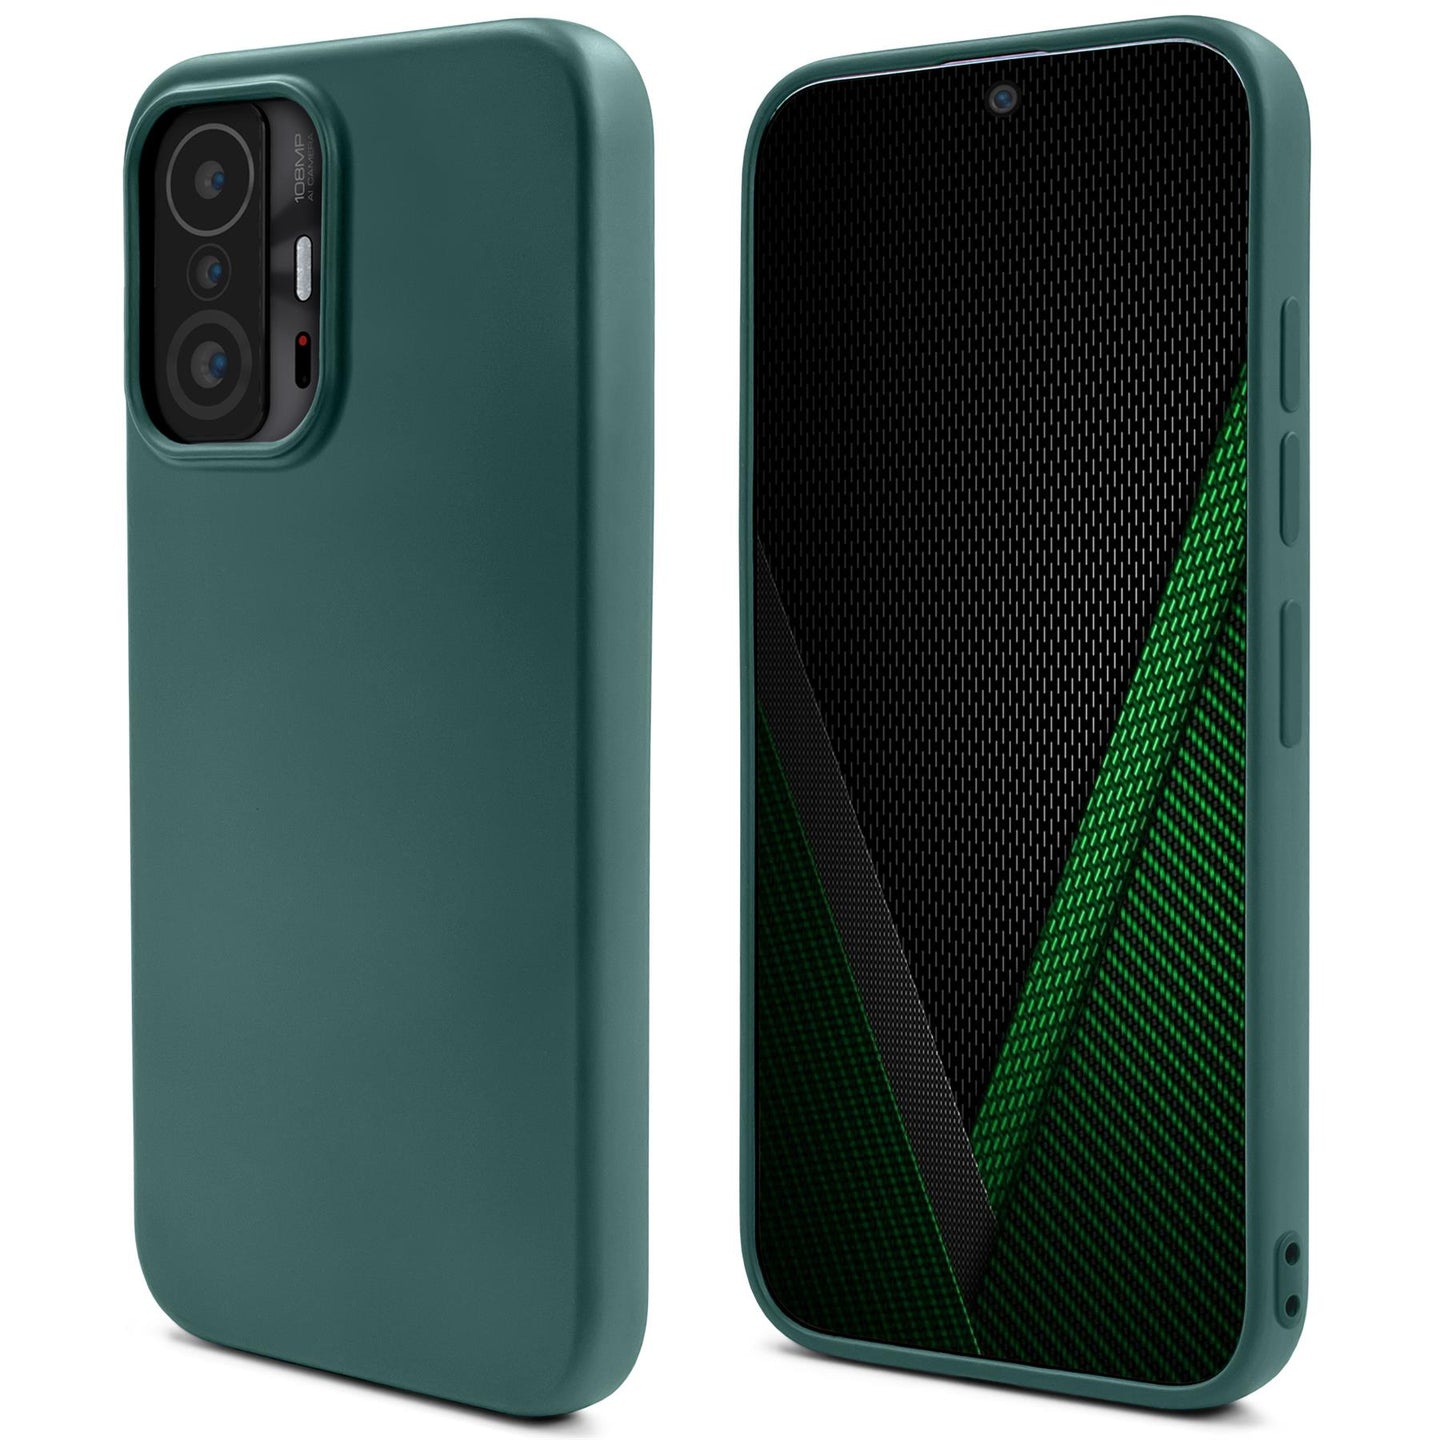 Moozy Lifestyle. Silicone Case for Xiaomi 11T and 11T Pro, Dark Green - Liquid Silicone Lightweight Cover with Matte Finish and Soft Microfiber Lining, Premium Silicone Case